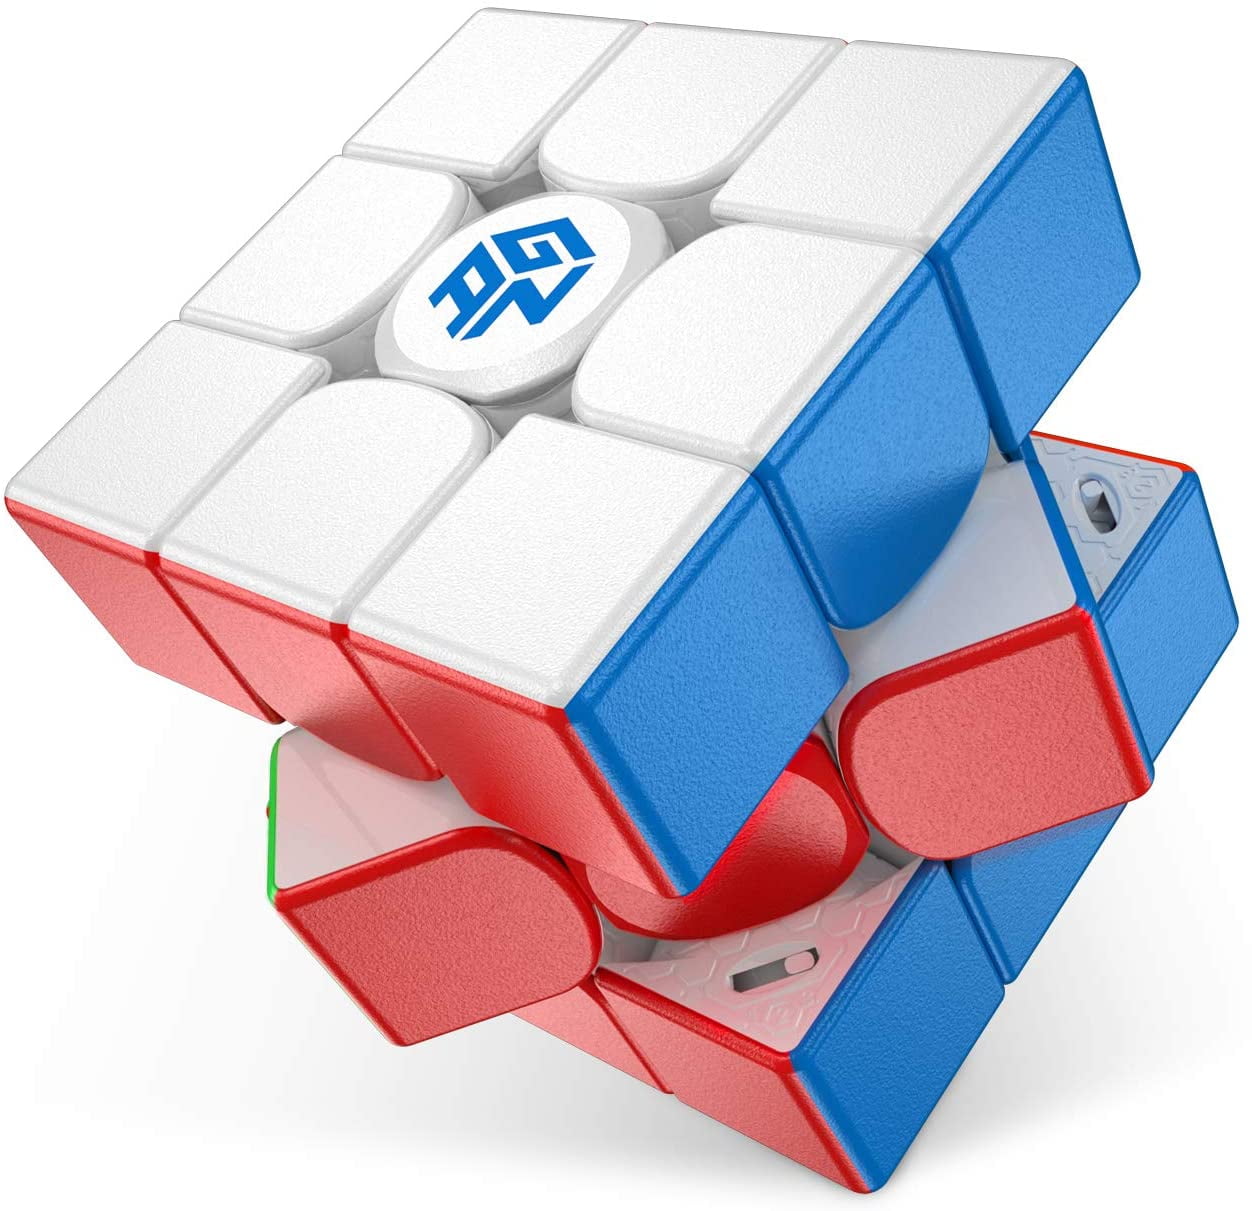 2019 New Flagship GAN356XS Magnetic 3x3 Magic Cube Stickerless Speed Puzzle Cube 